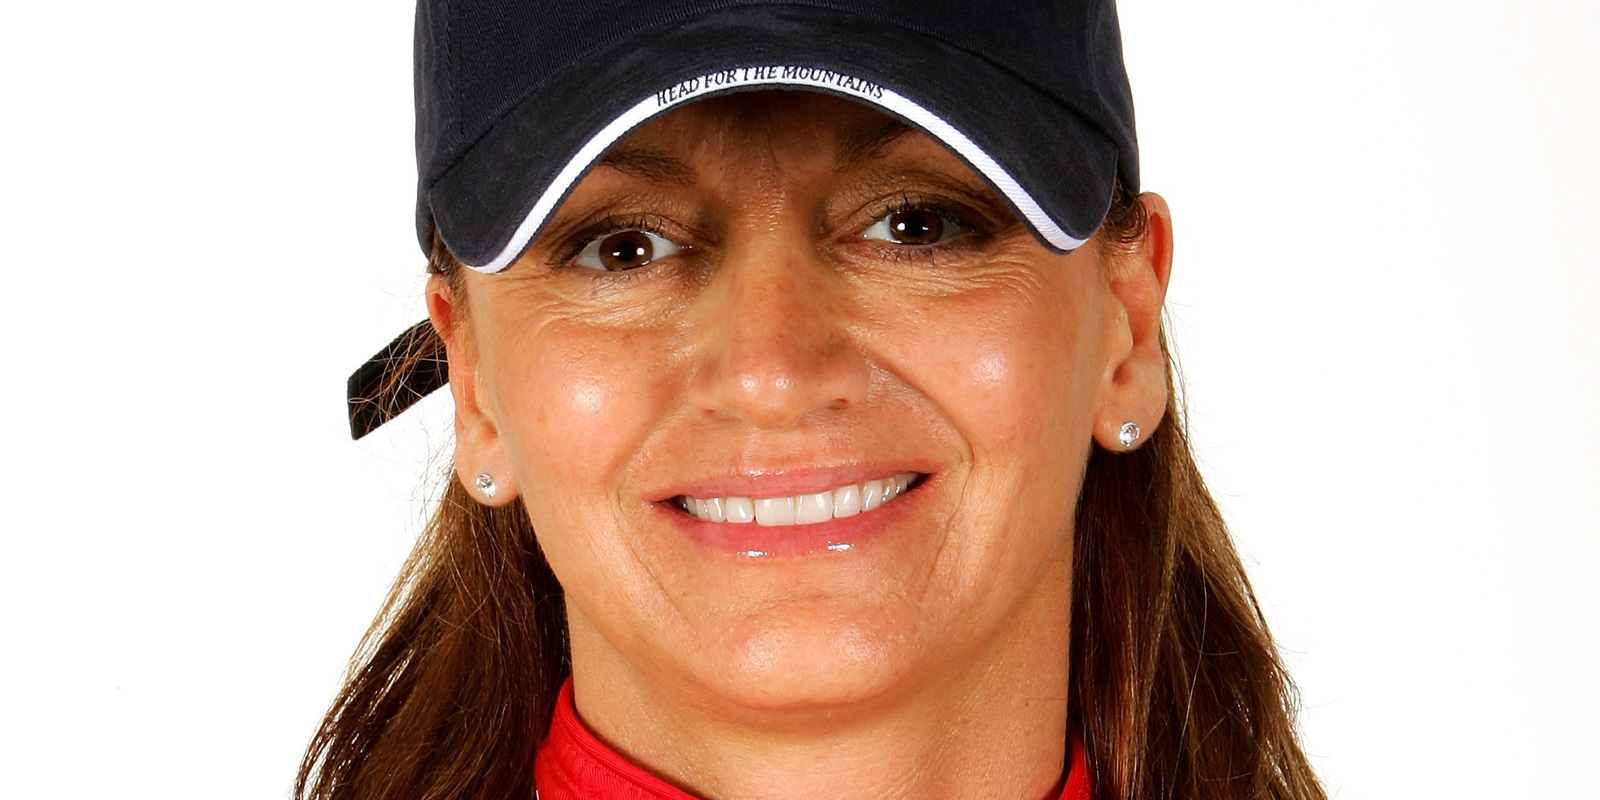 Former NASCAR driver Shawna Robinson diagnosed with breast cancer